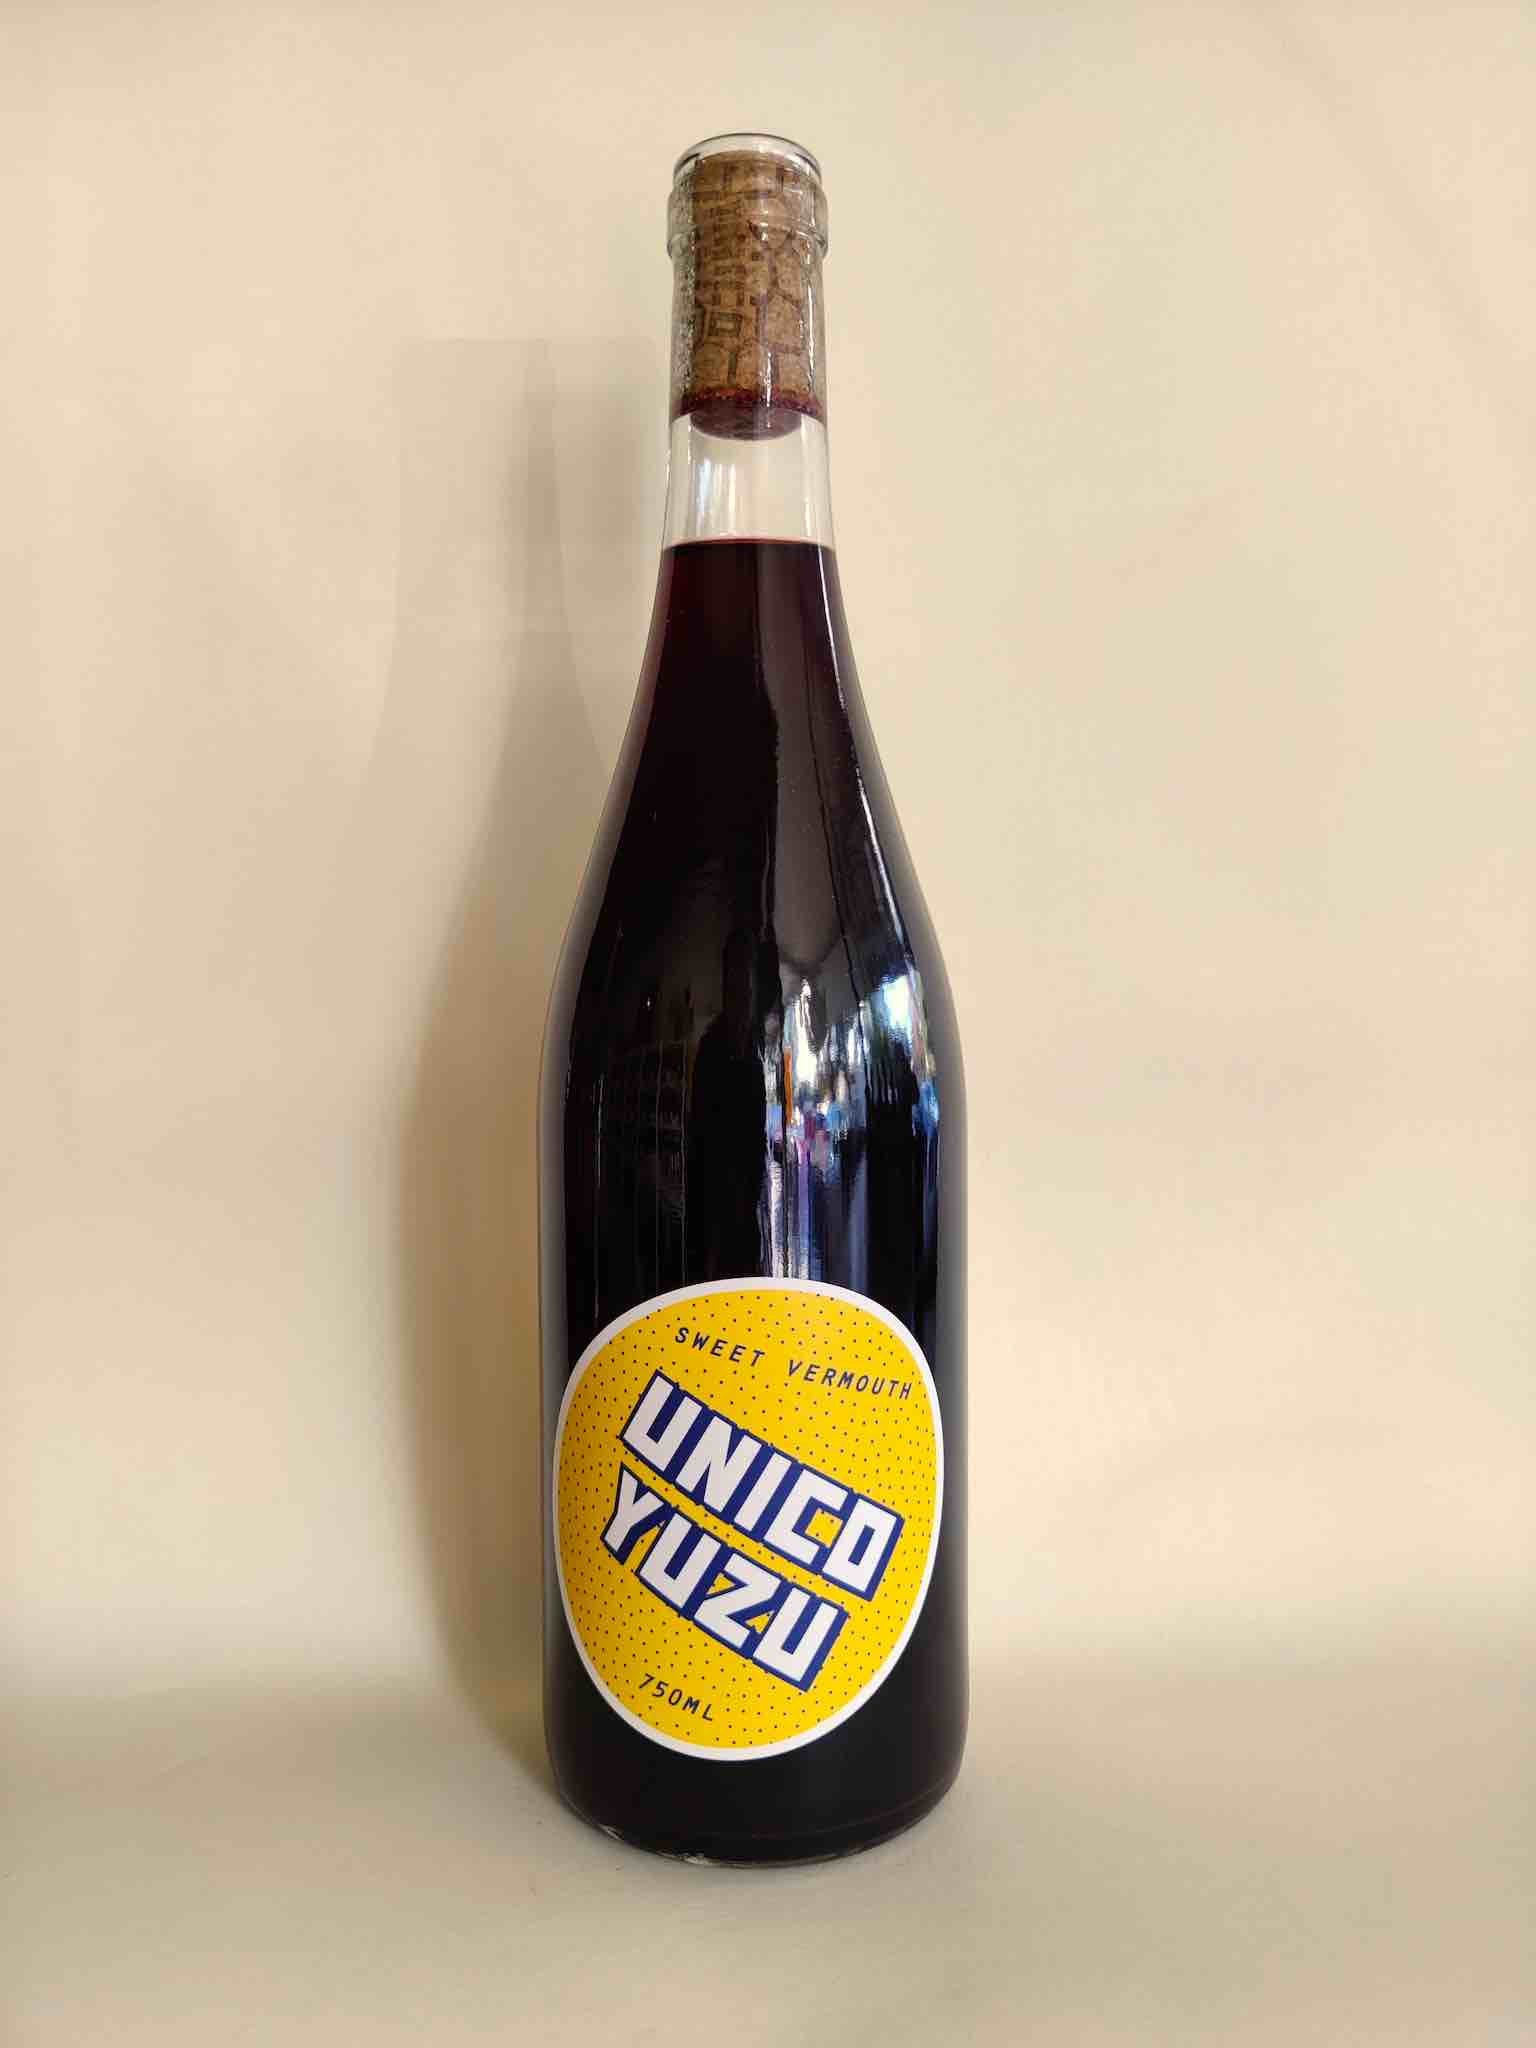 A 750ml bottle of Unico Yuzu Vermouth from the Adelaide Hills, South Australia. 